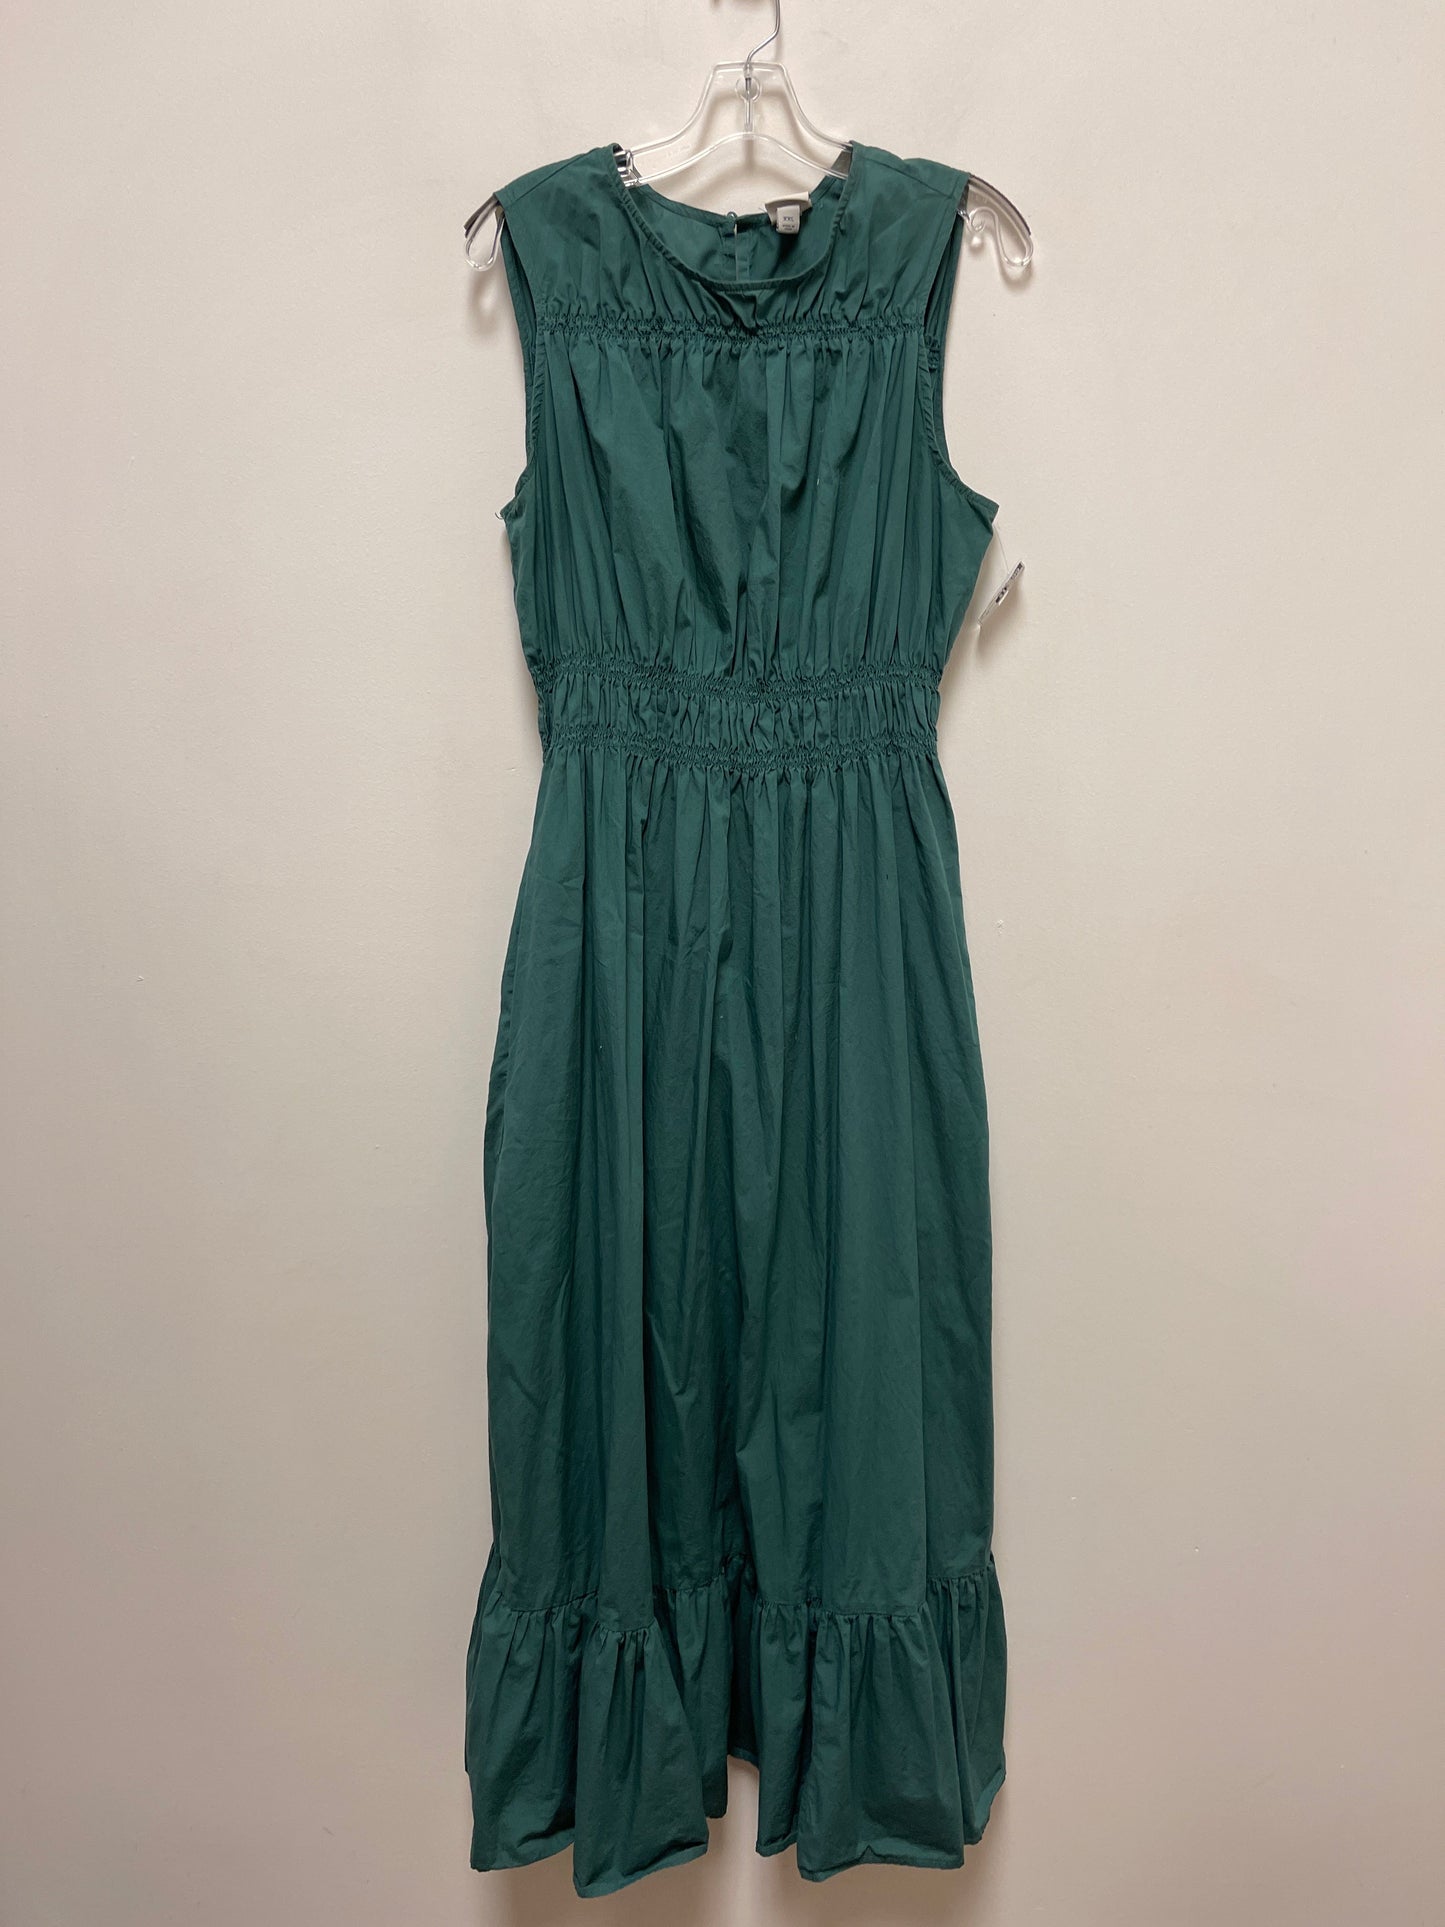 Green Dress Casual Maxi A New Day, Size 2x